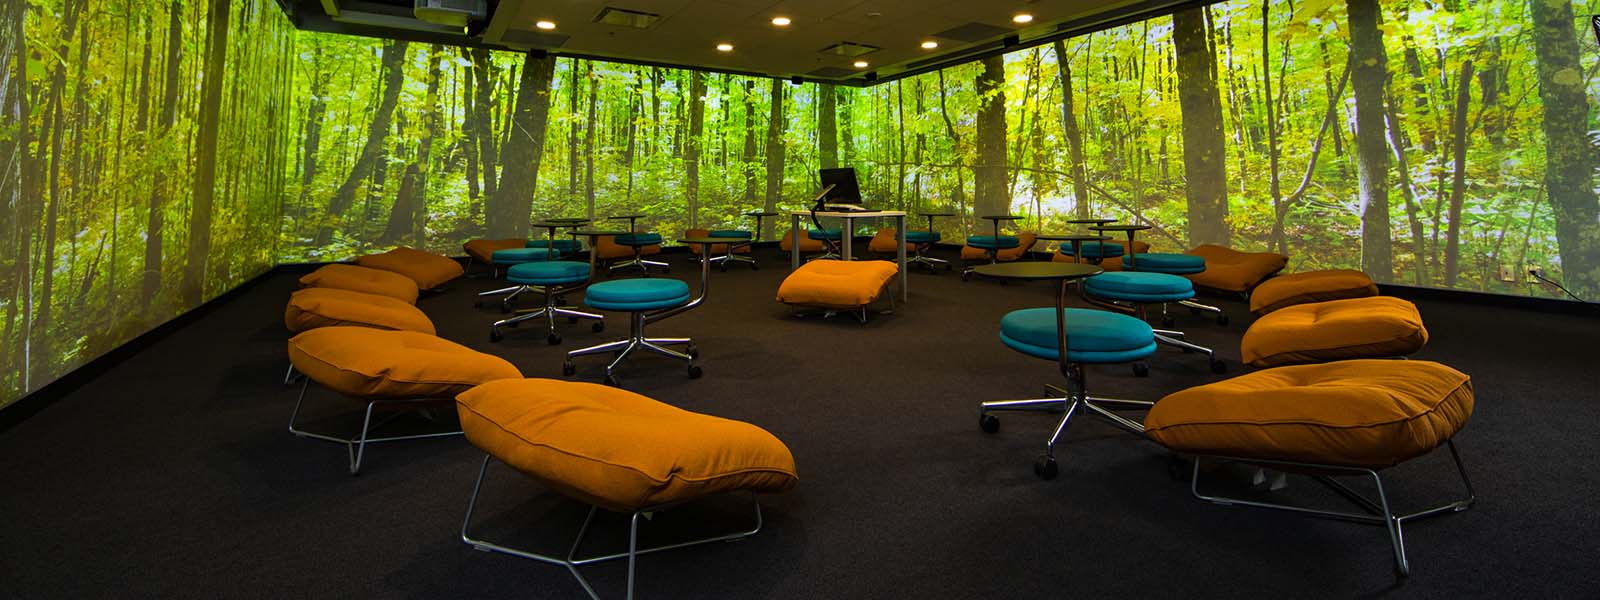 A bunch of seats arranged in the circle of a room with trees projected on all four walls.